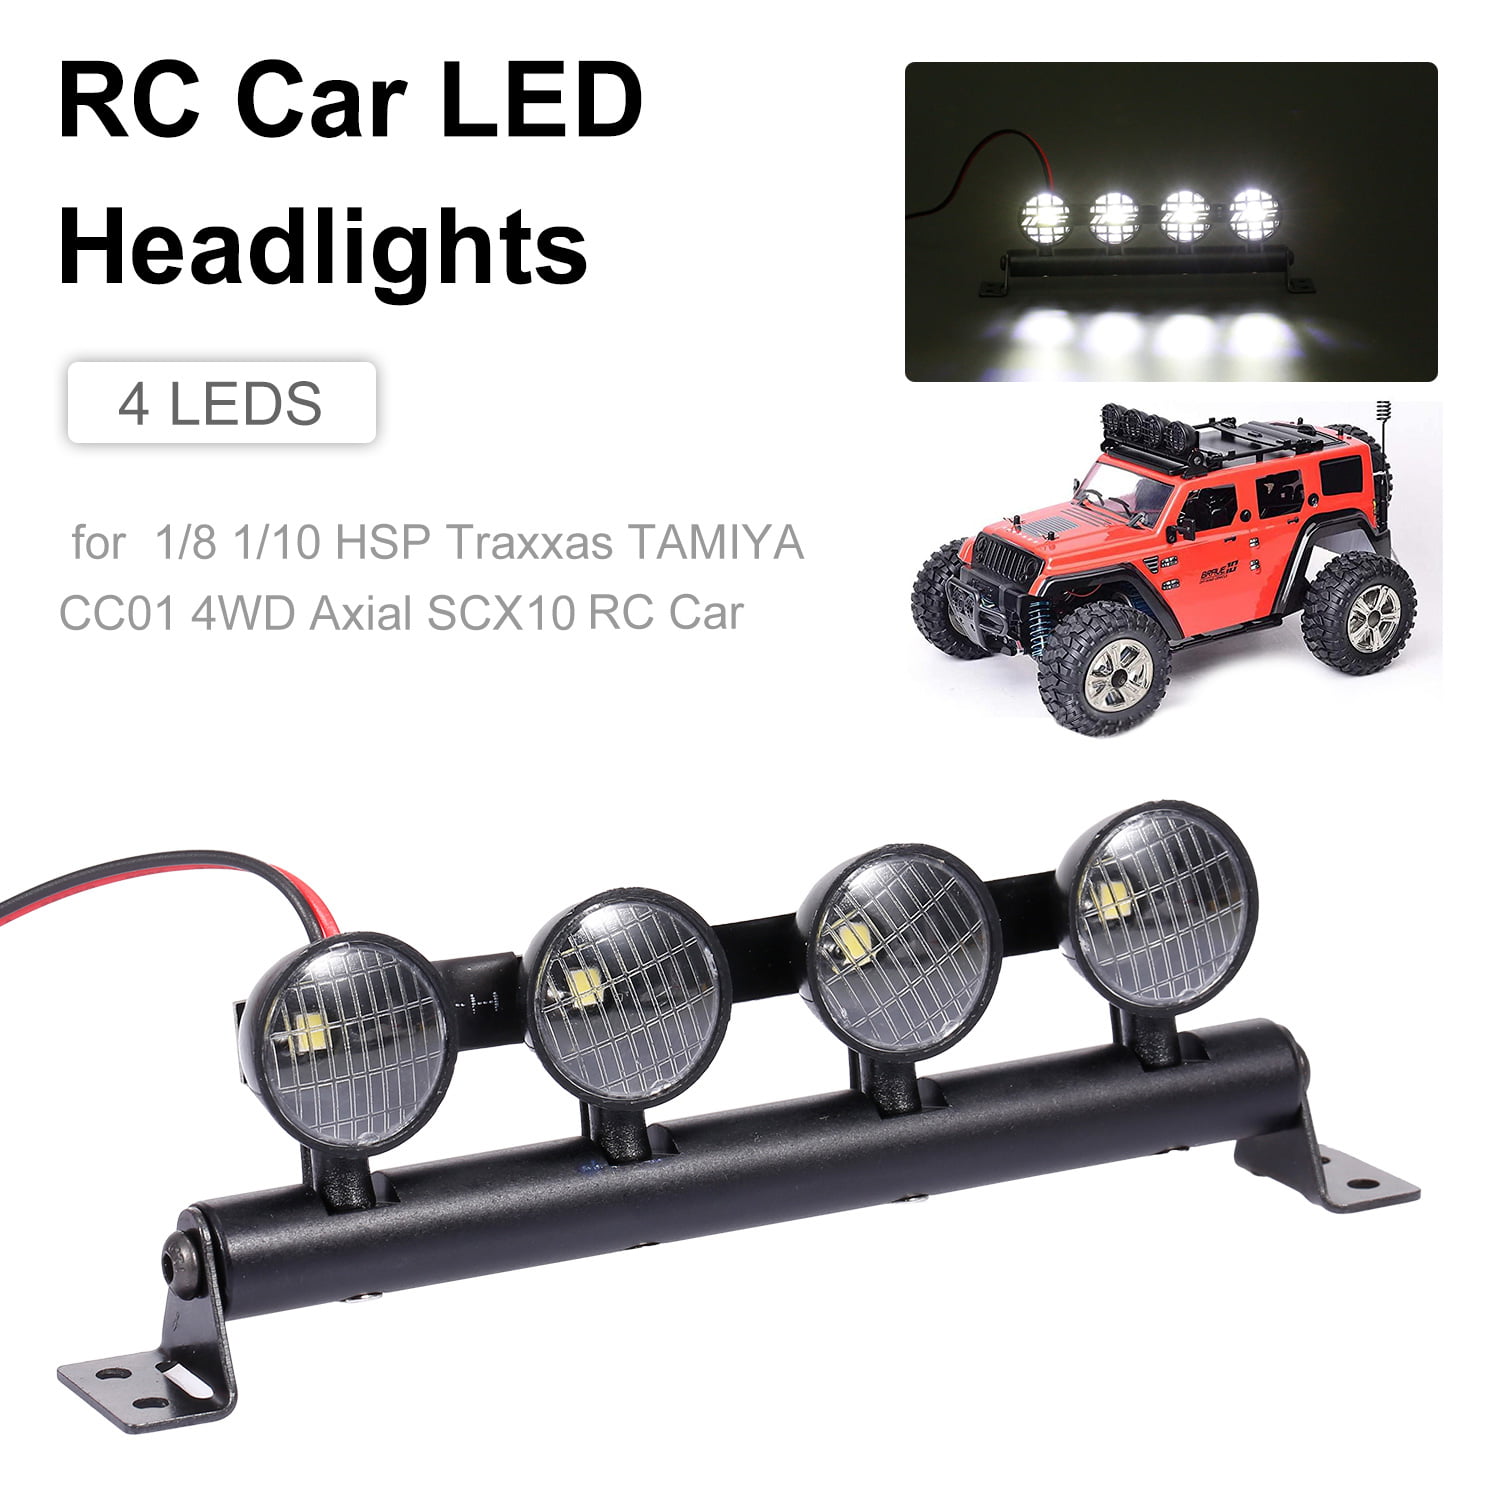 Details about   RC Car LED Lighting System 